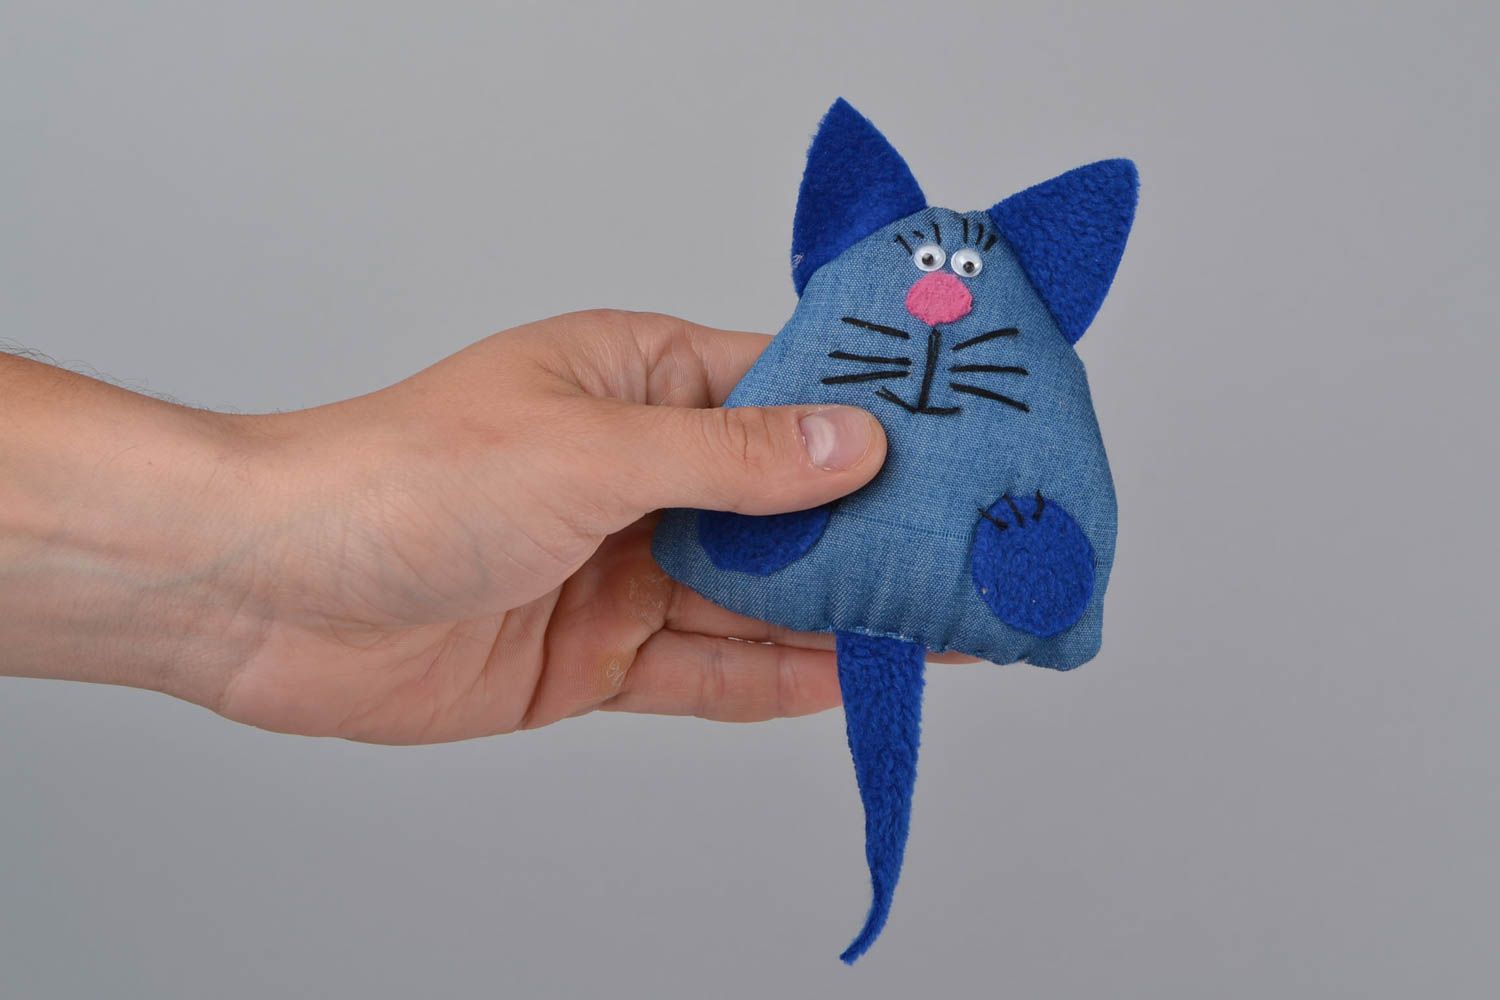 Fleece toy funny blue cat handmade decorative stuffed toy for home decor photo 2